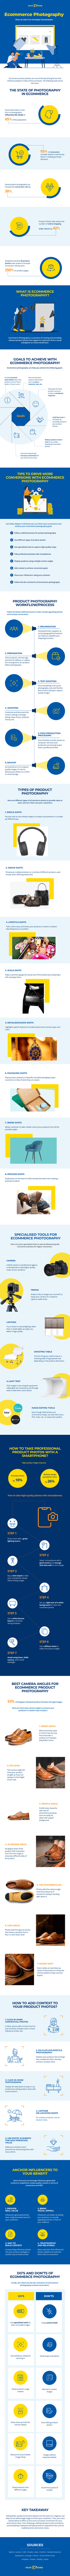 Ecommerce Photography   How to Use It to Increase Conversions (Infographic)